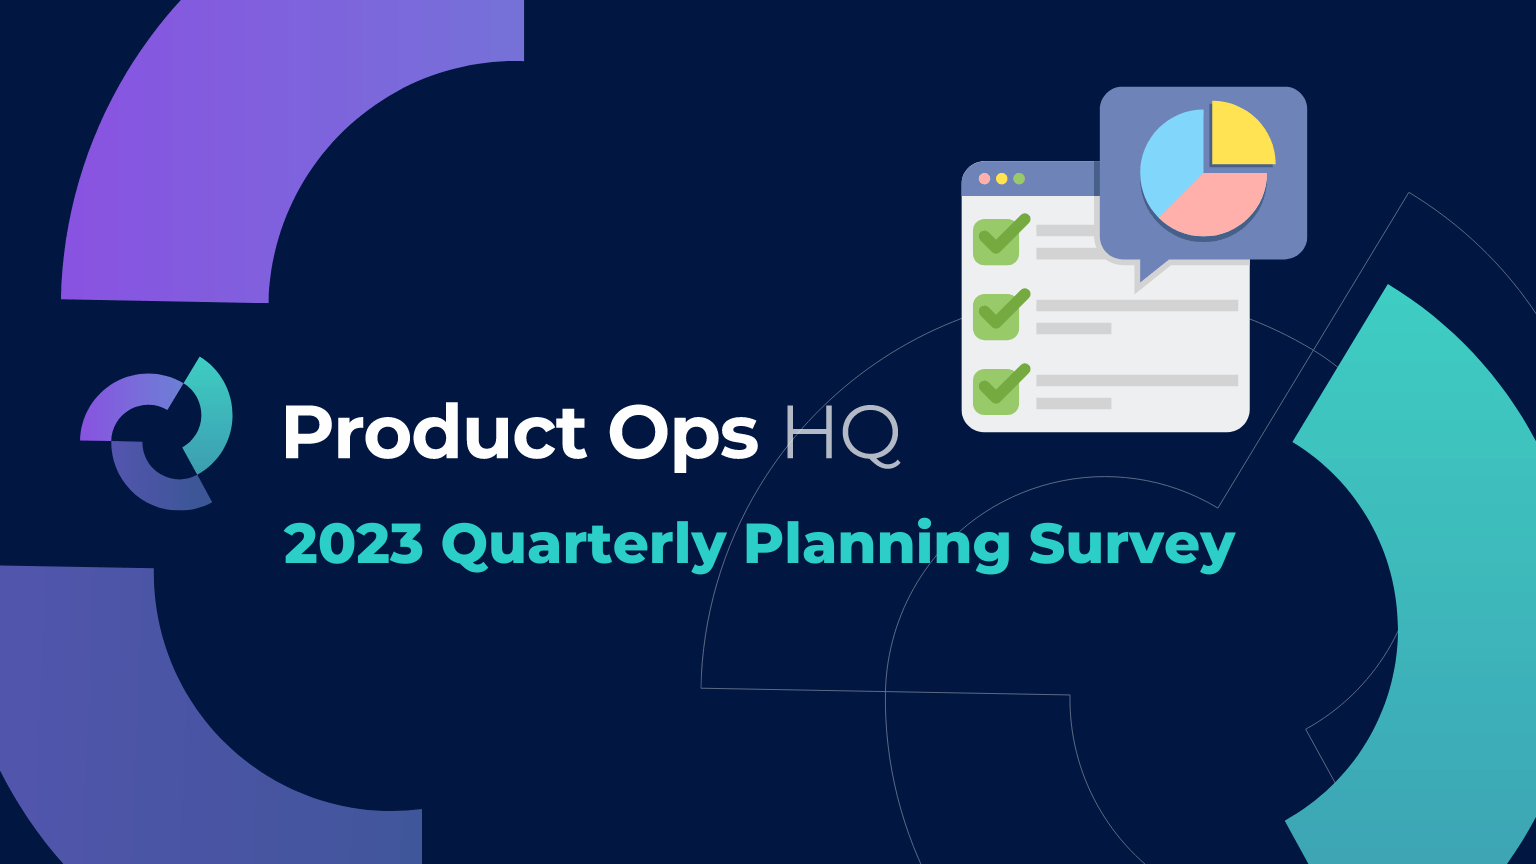 State of Quarterly Roadmap Planning – Summary of the 2023 Product Ops HQ Survey